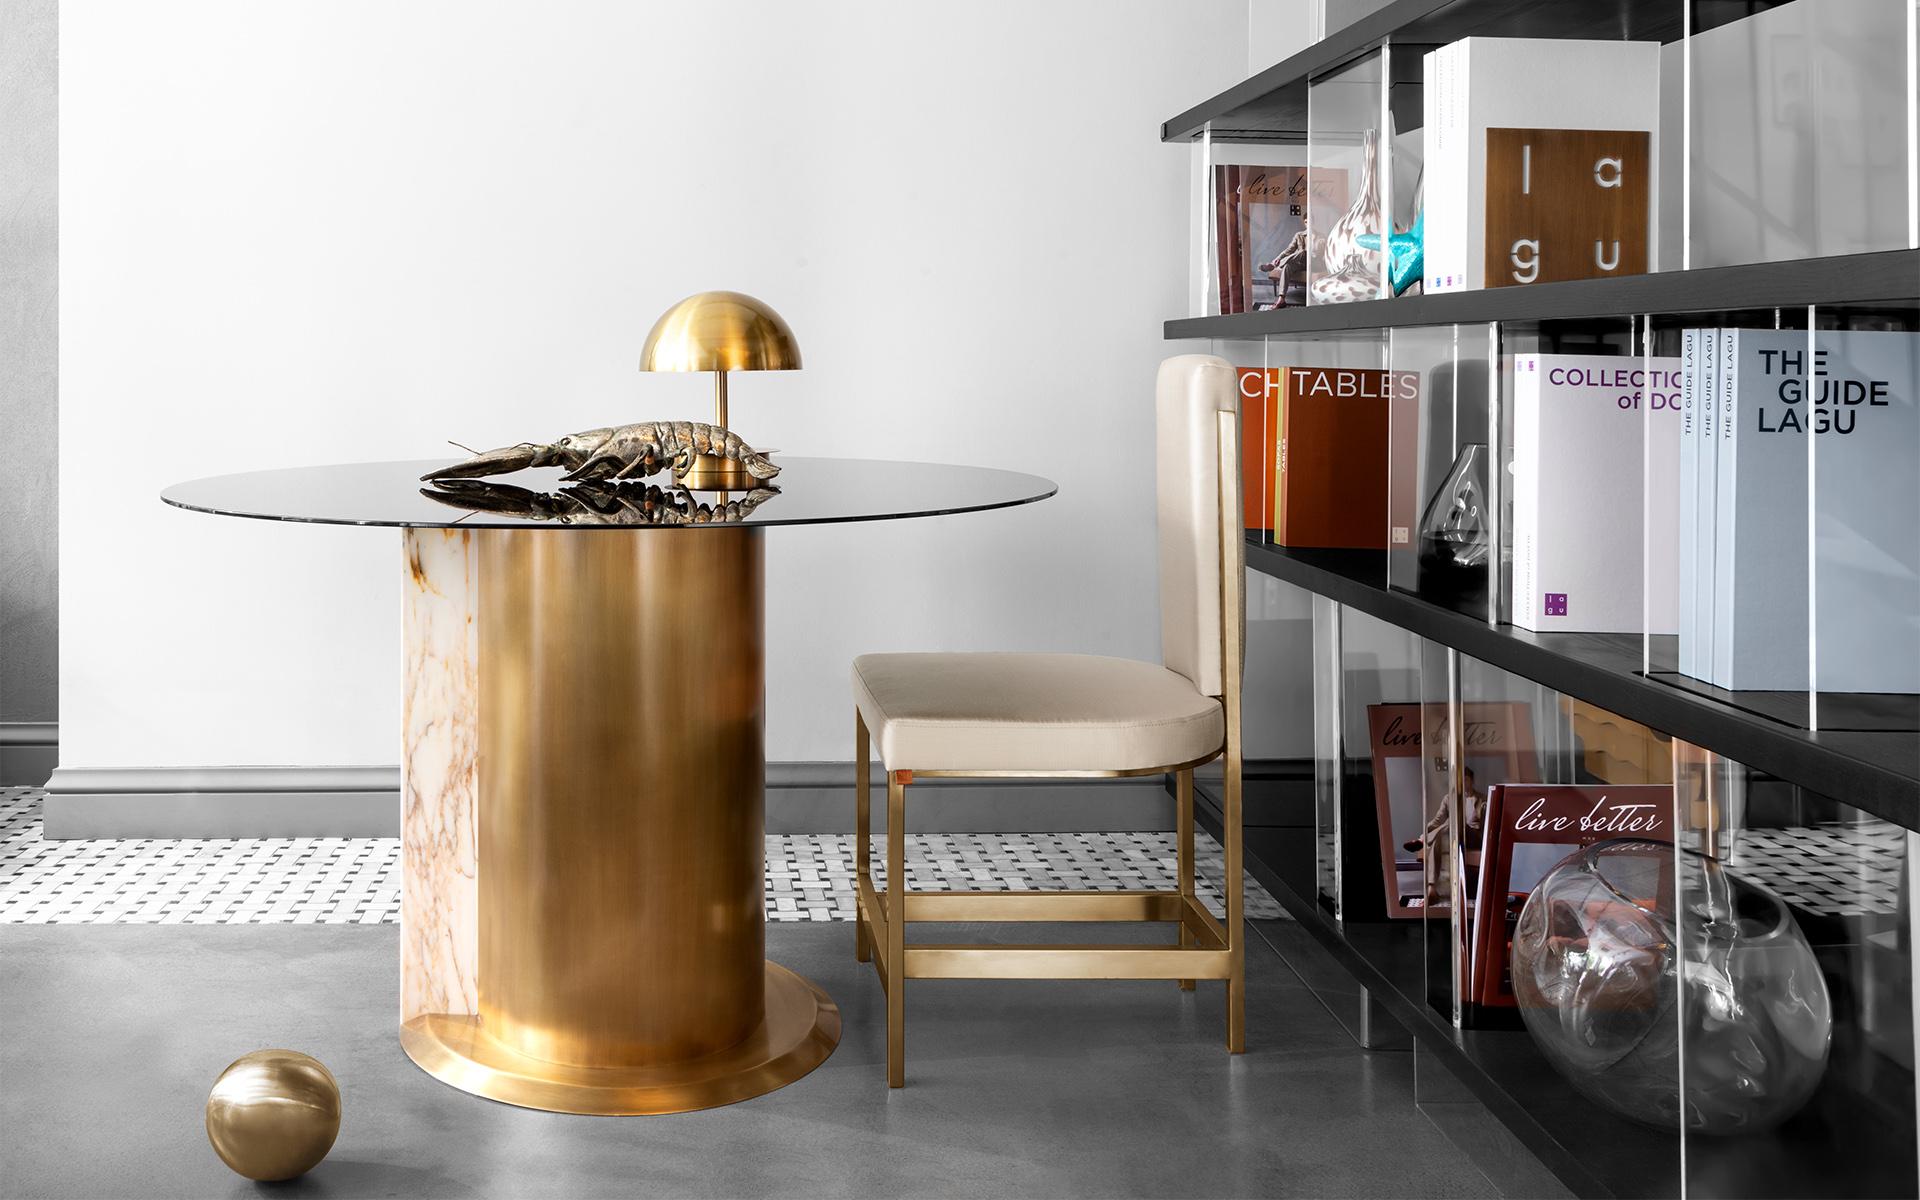 **CUSTOMIZABLE
**LEAD TIME 5-6 WEEKS

Get harmony in your home with TIM TABLE, which combines cirucular body, glass top, wood and metal details with different materials... 

Combining lagu's signature materials, brass and black glass, TIM TABLE